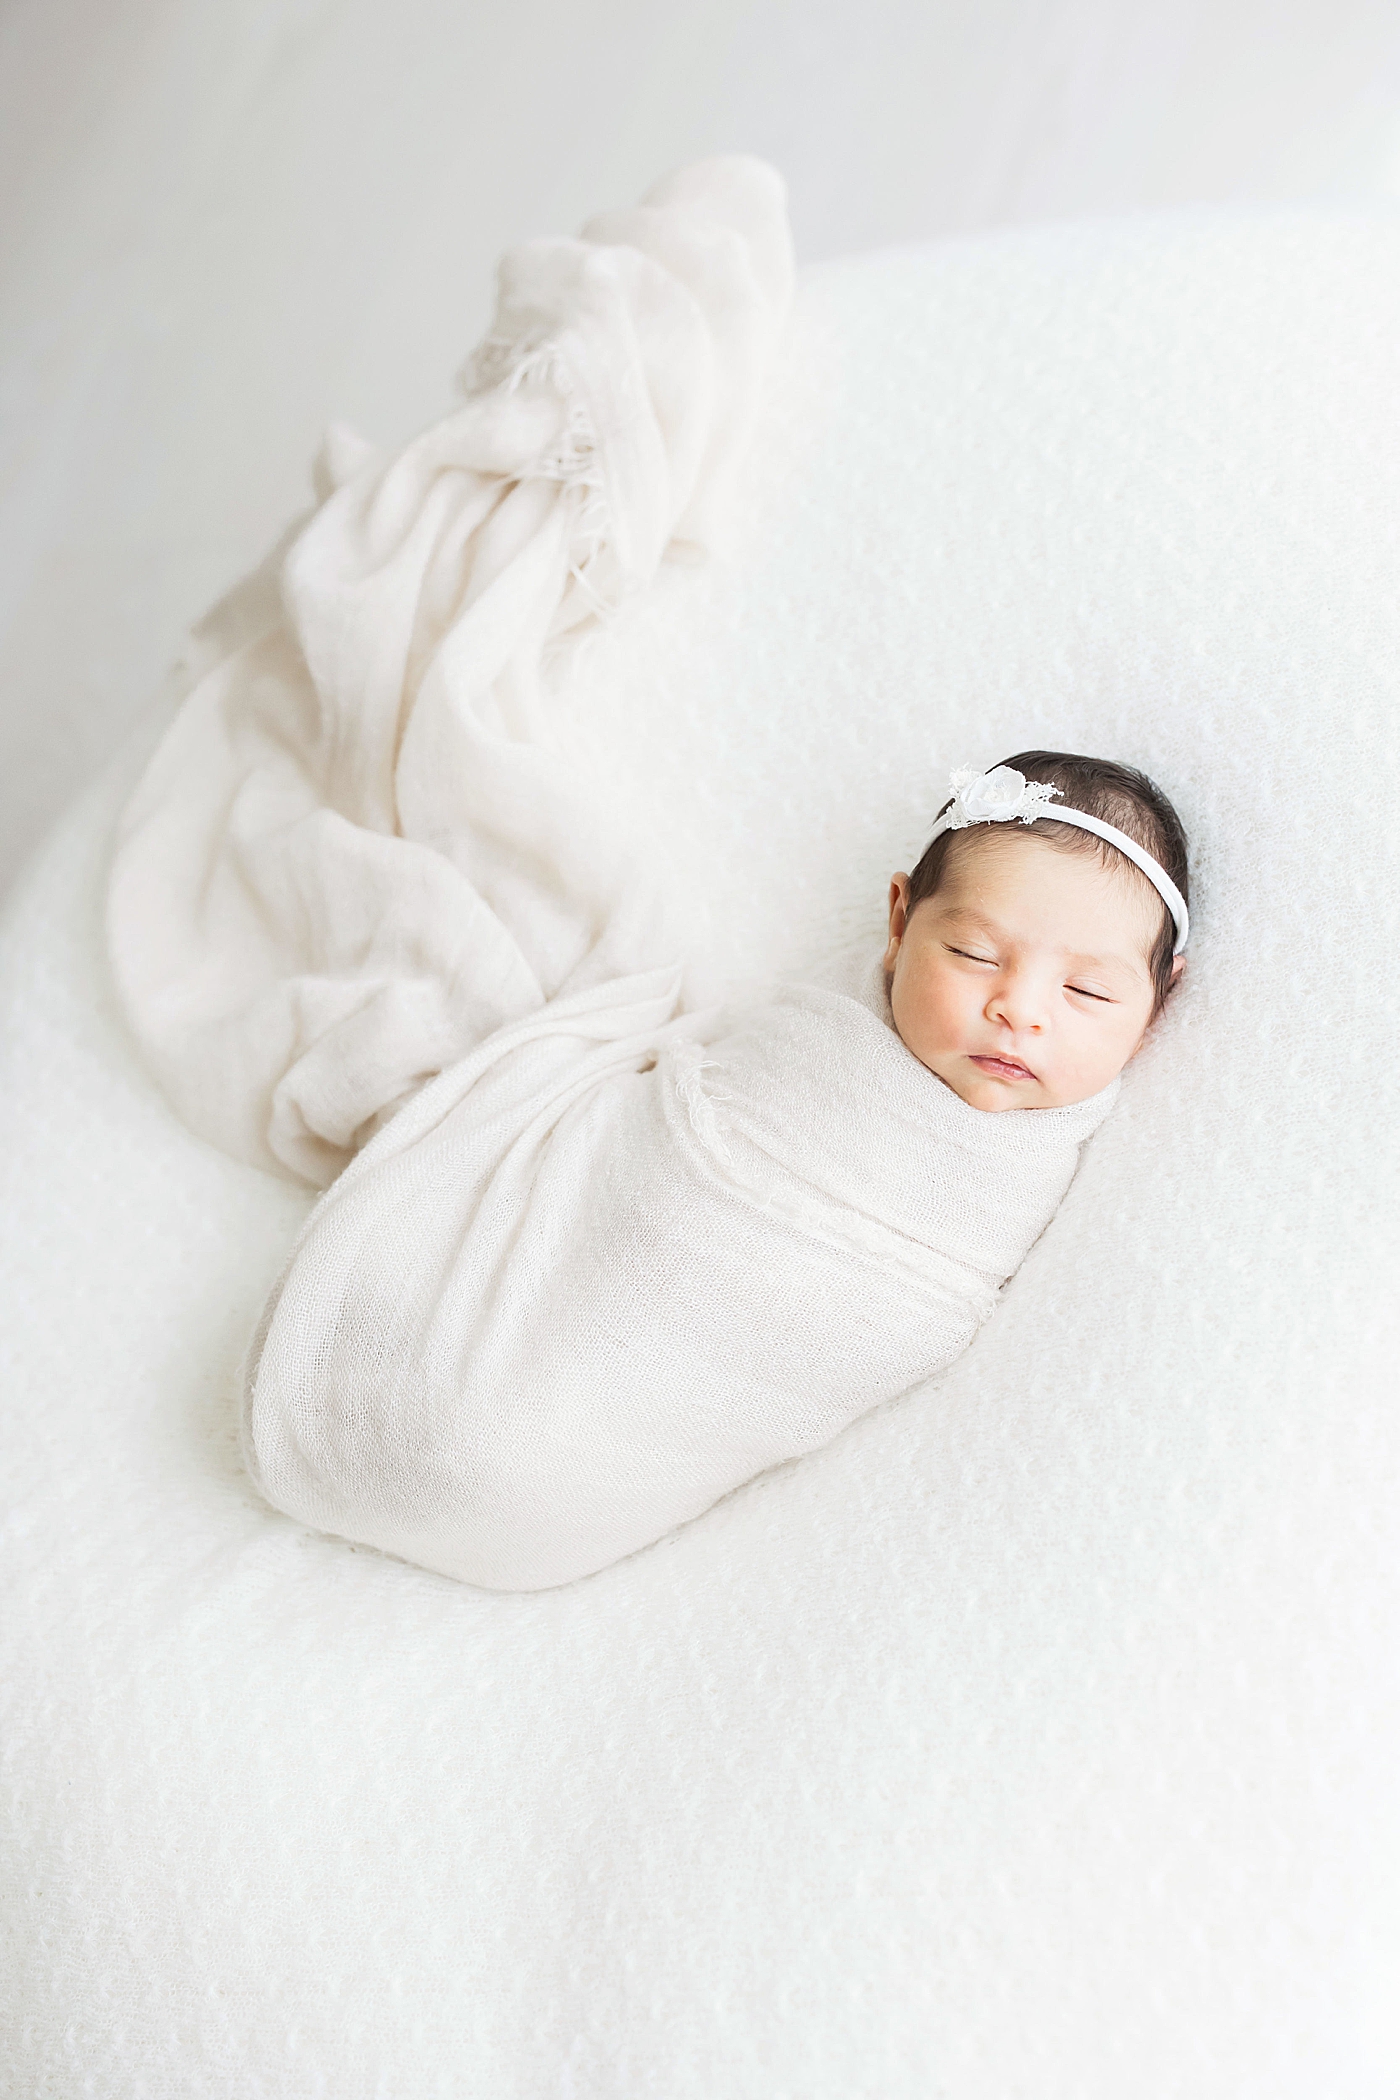 Newborn baby girl swaddled in white for photos with Fresh Light Photography.